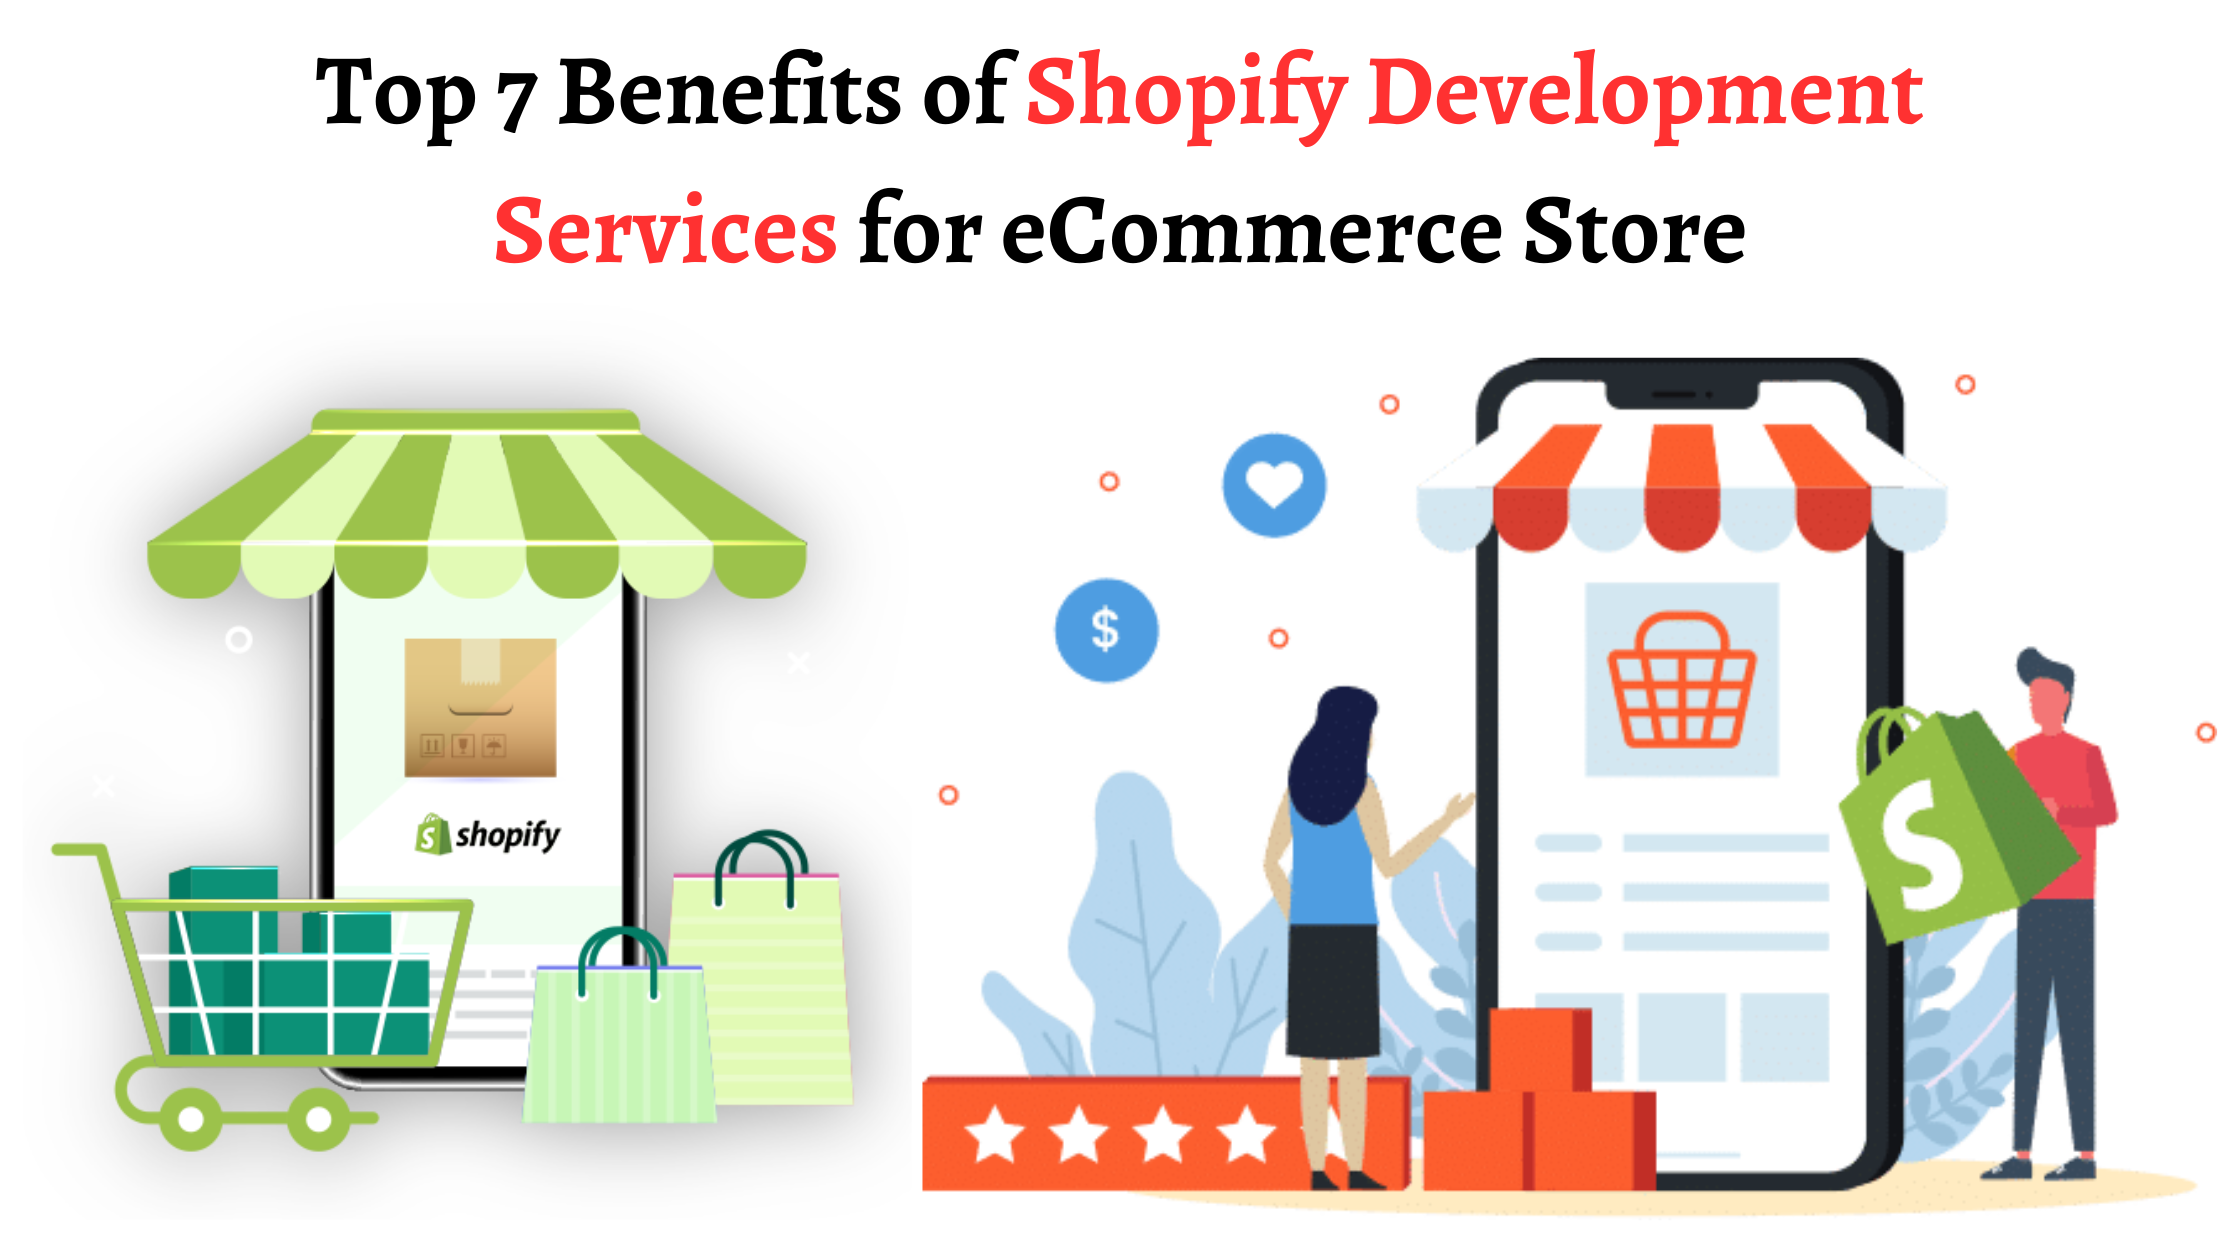 Top 7 Benefits of Shopify for eCommerce Store Development